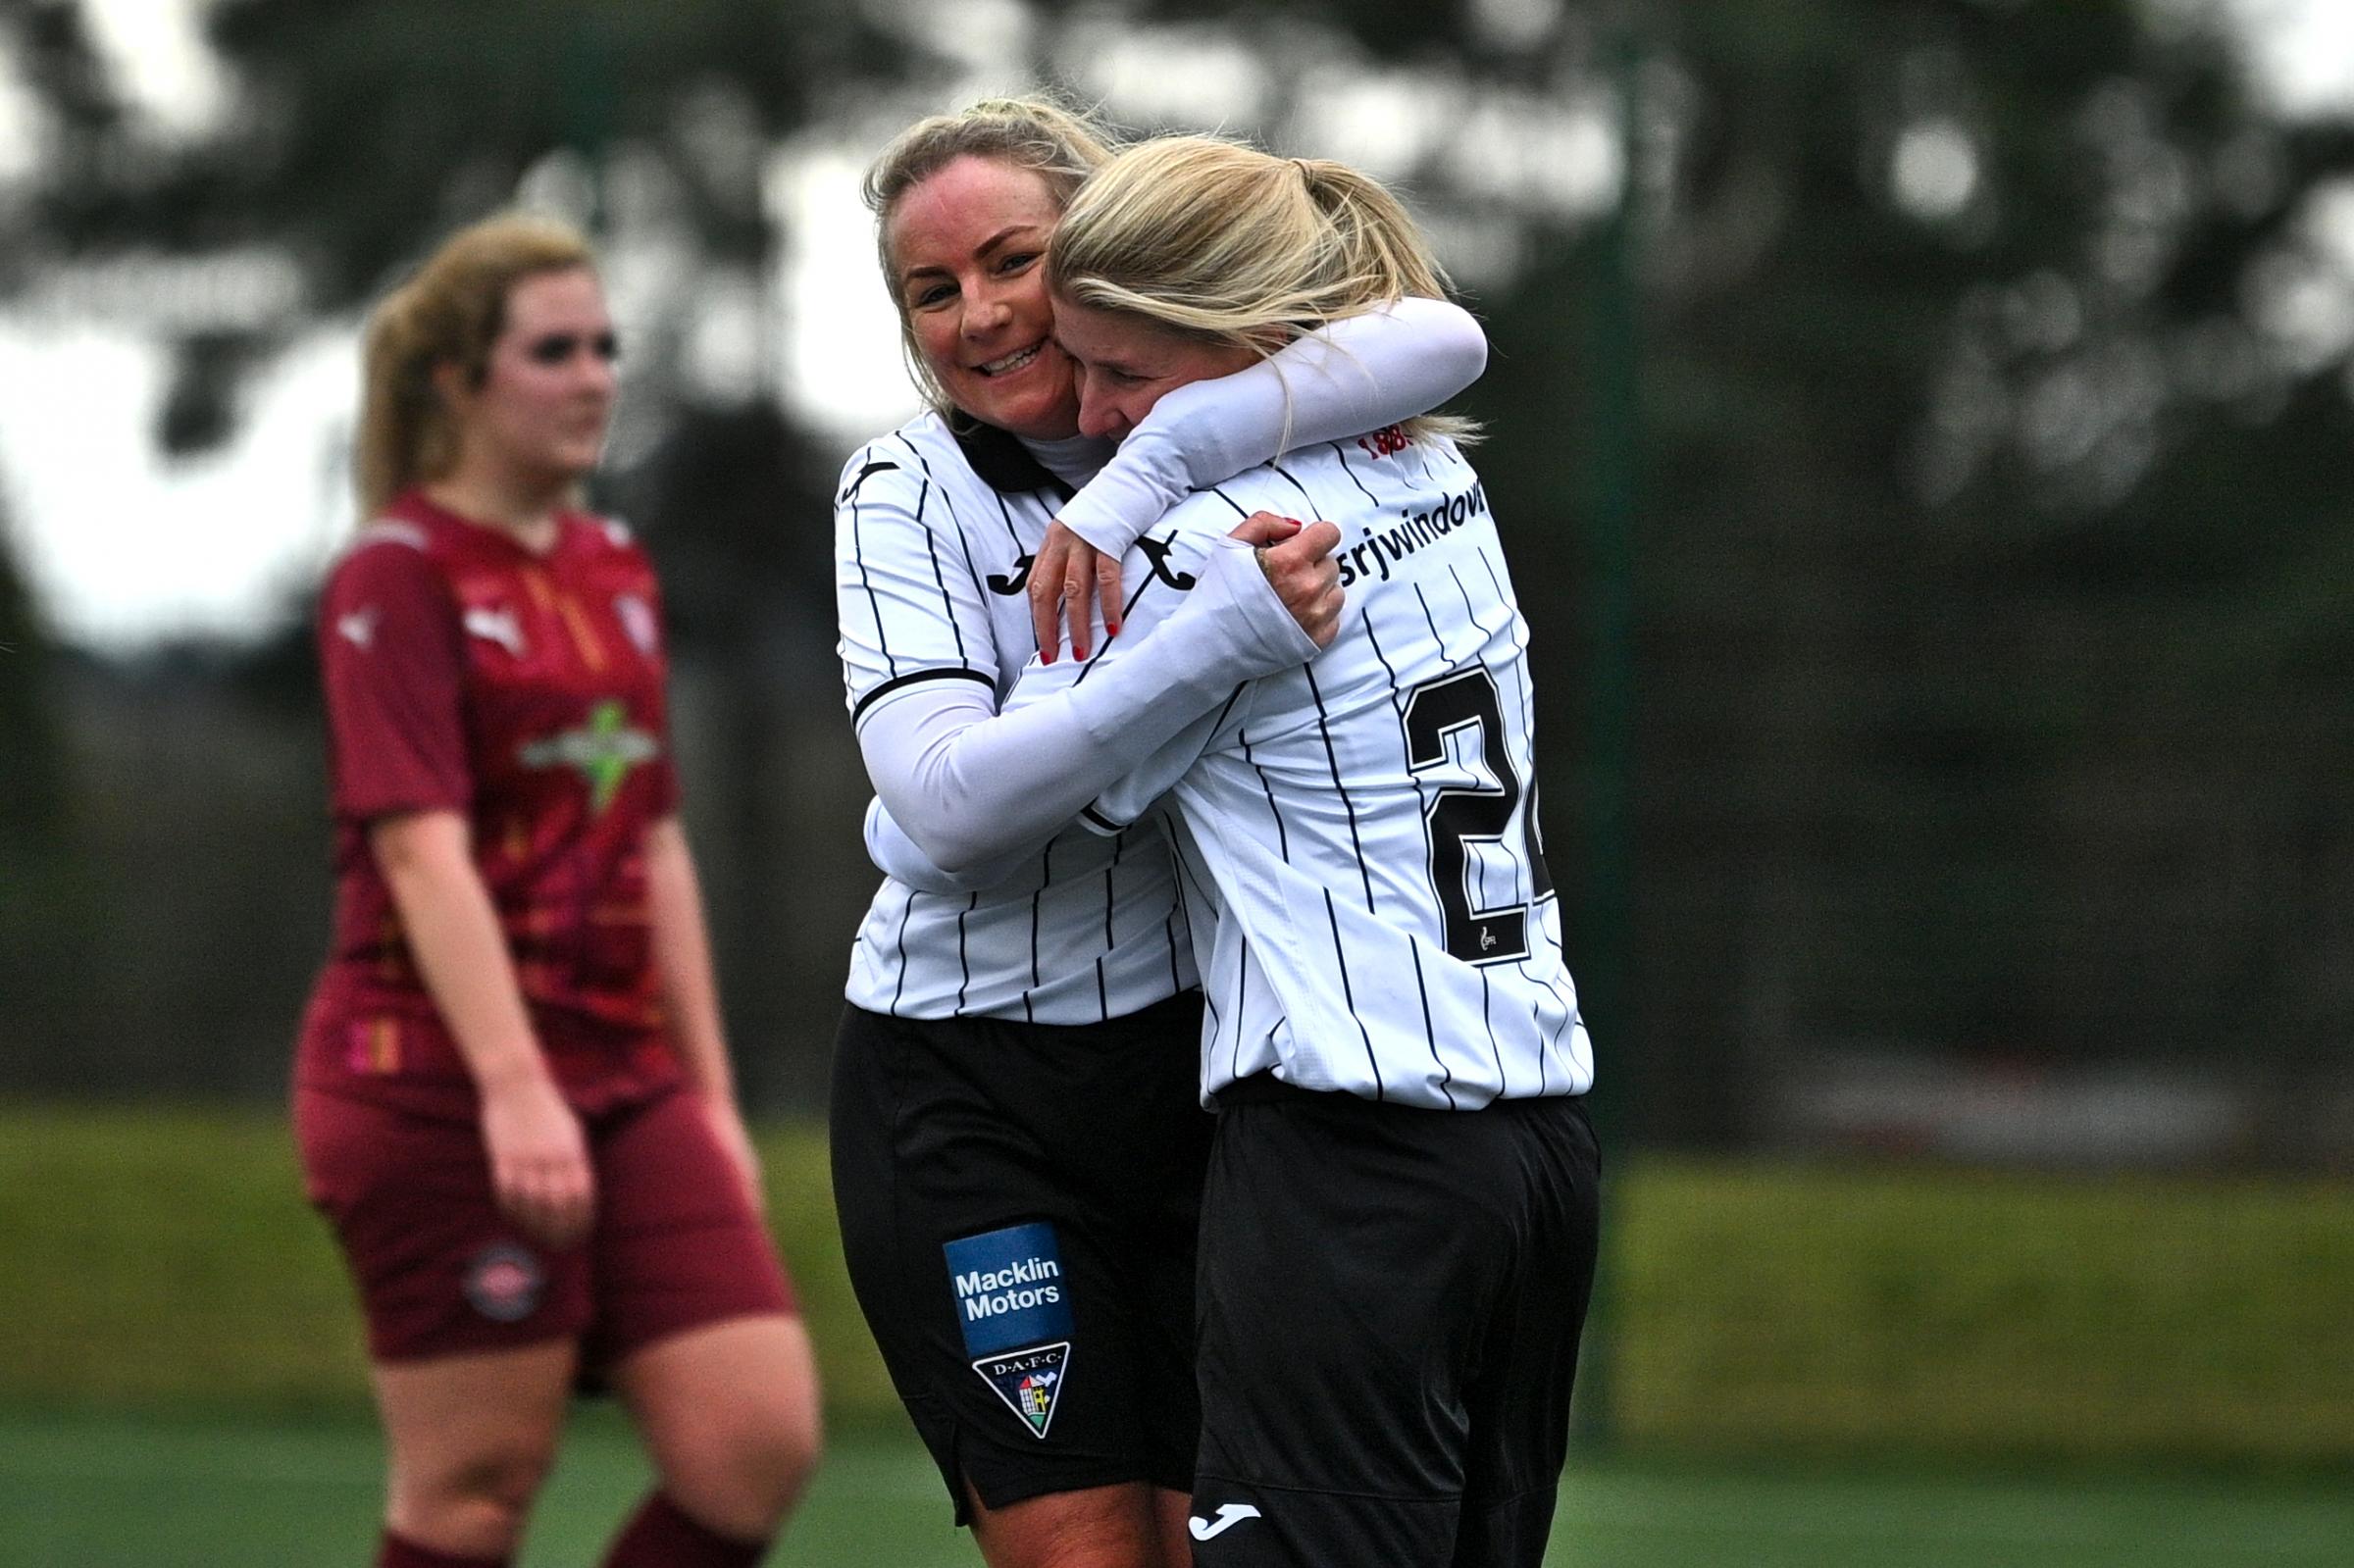 Dunfermline Athletic Ladies defeat Linlithgow Rose in SWFL East